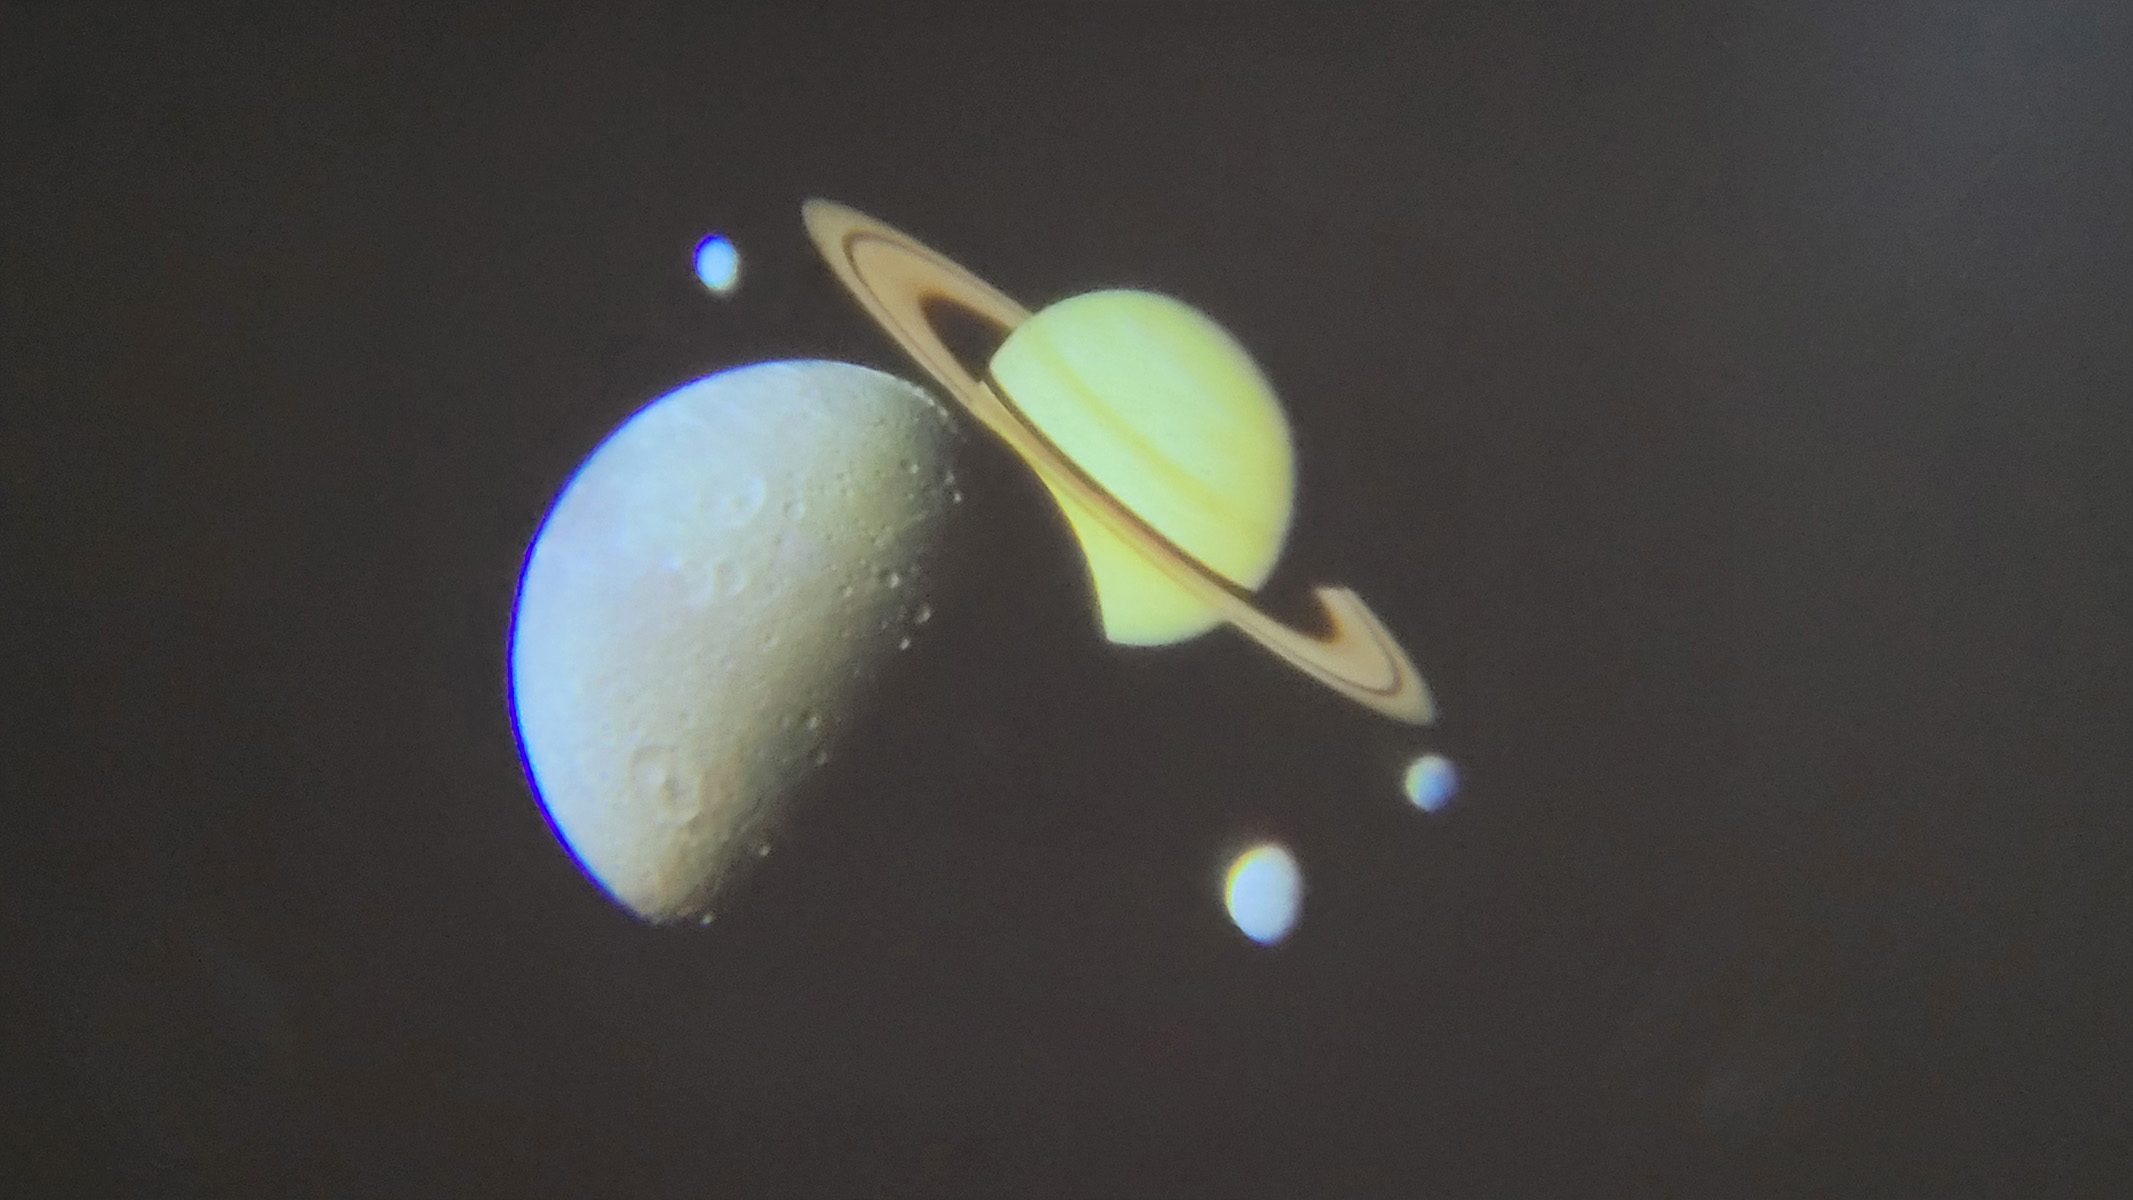 Image shows a projection of planets